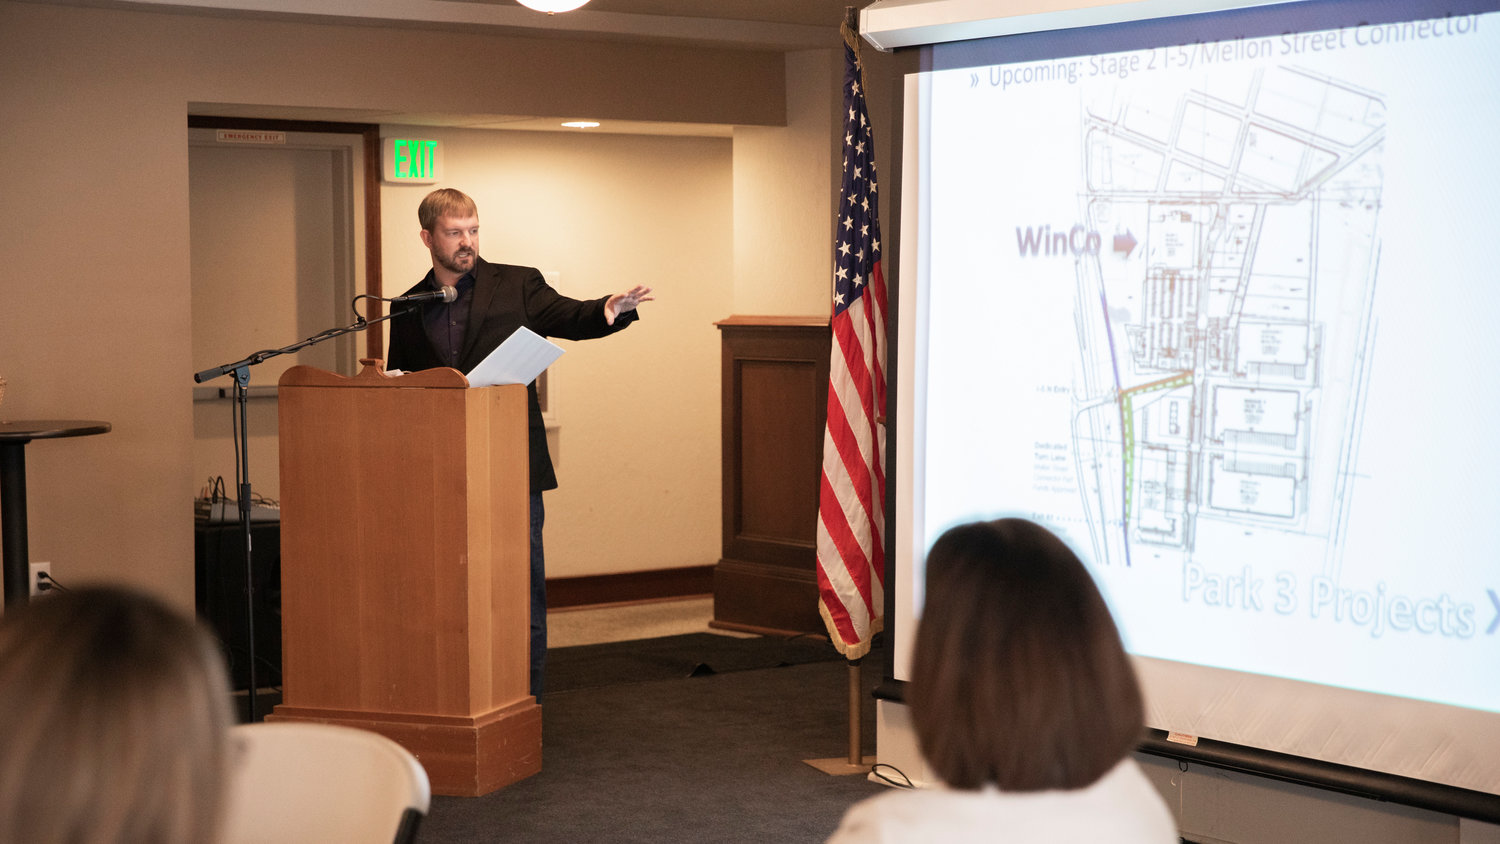 Port of Centralia Commissioner Kyle Markstrom points to a map of the Centralia Station project featuring Winco during a Port of Centralia meeting at O’Blarney’s Wednesday morning.